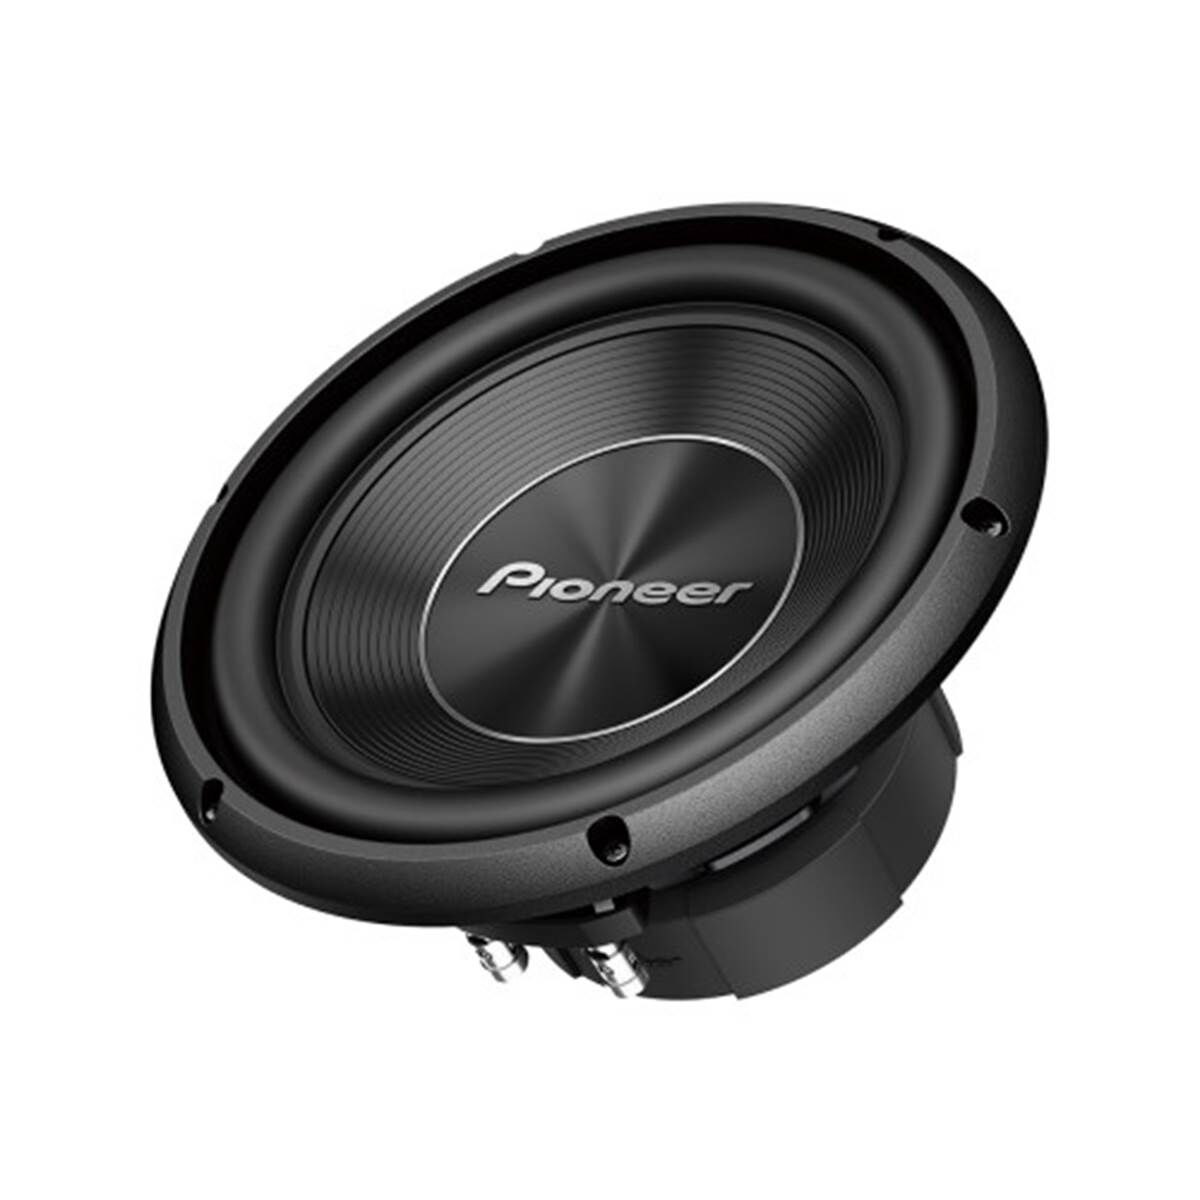 Pioneer Subwoofer para coche 25 cm 1300 w  ts-a250s4